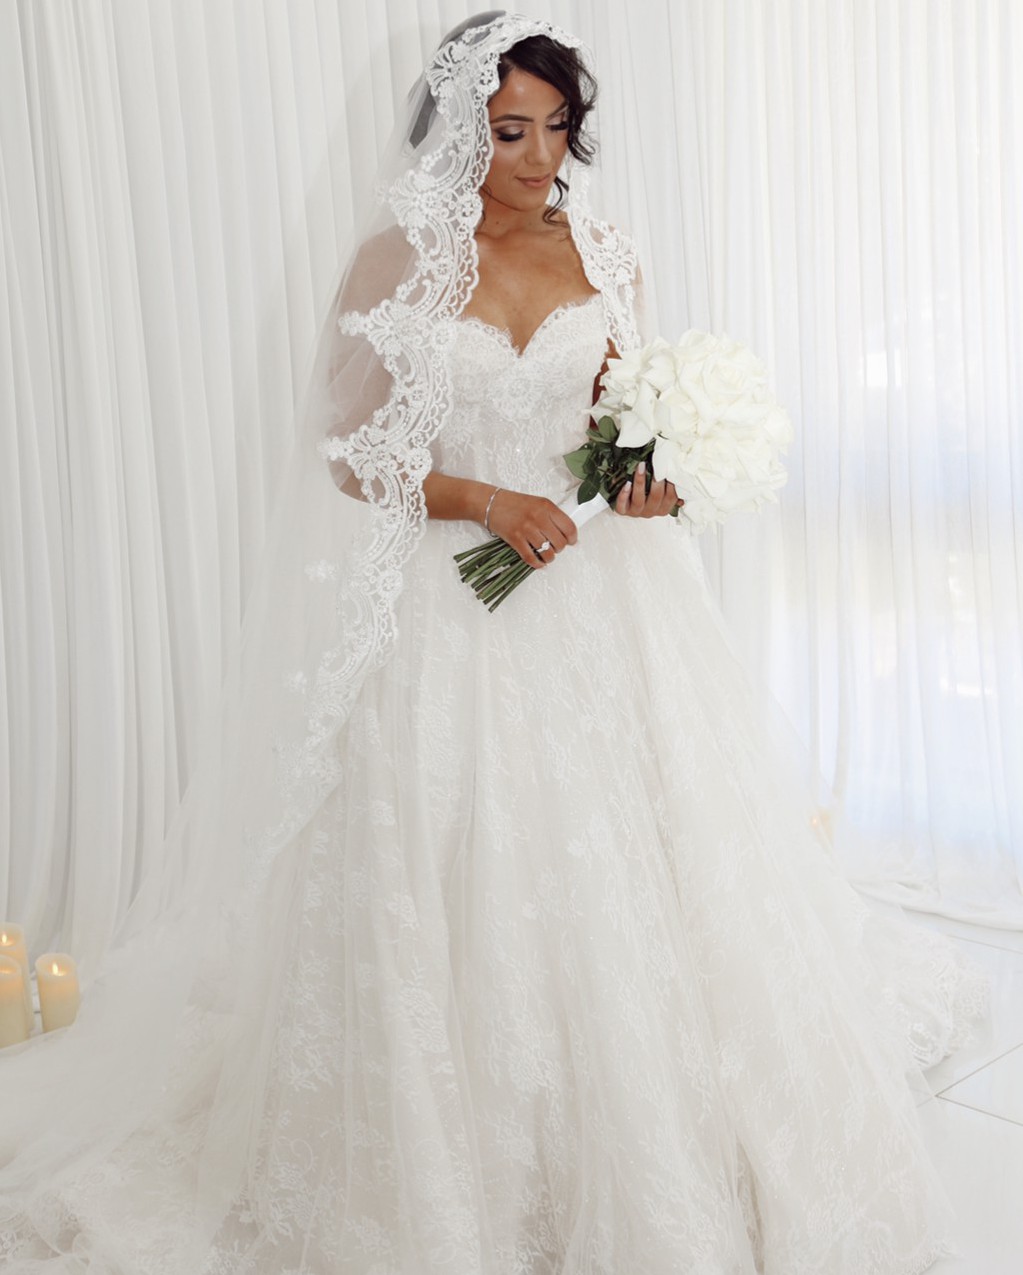 Norma And Lili Bridal Couture Custom Made Used Wedding Dress Save 53% ...